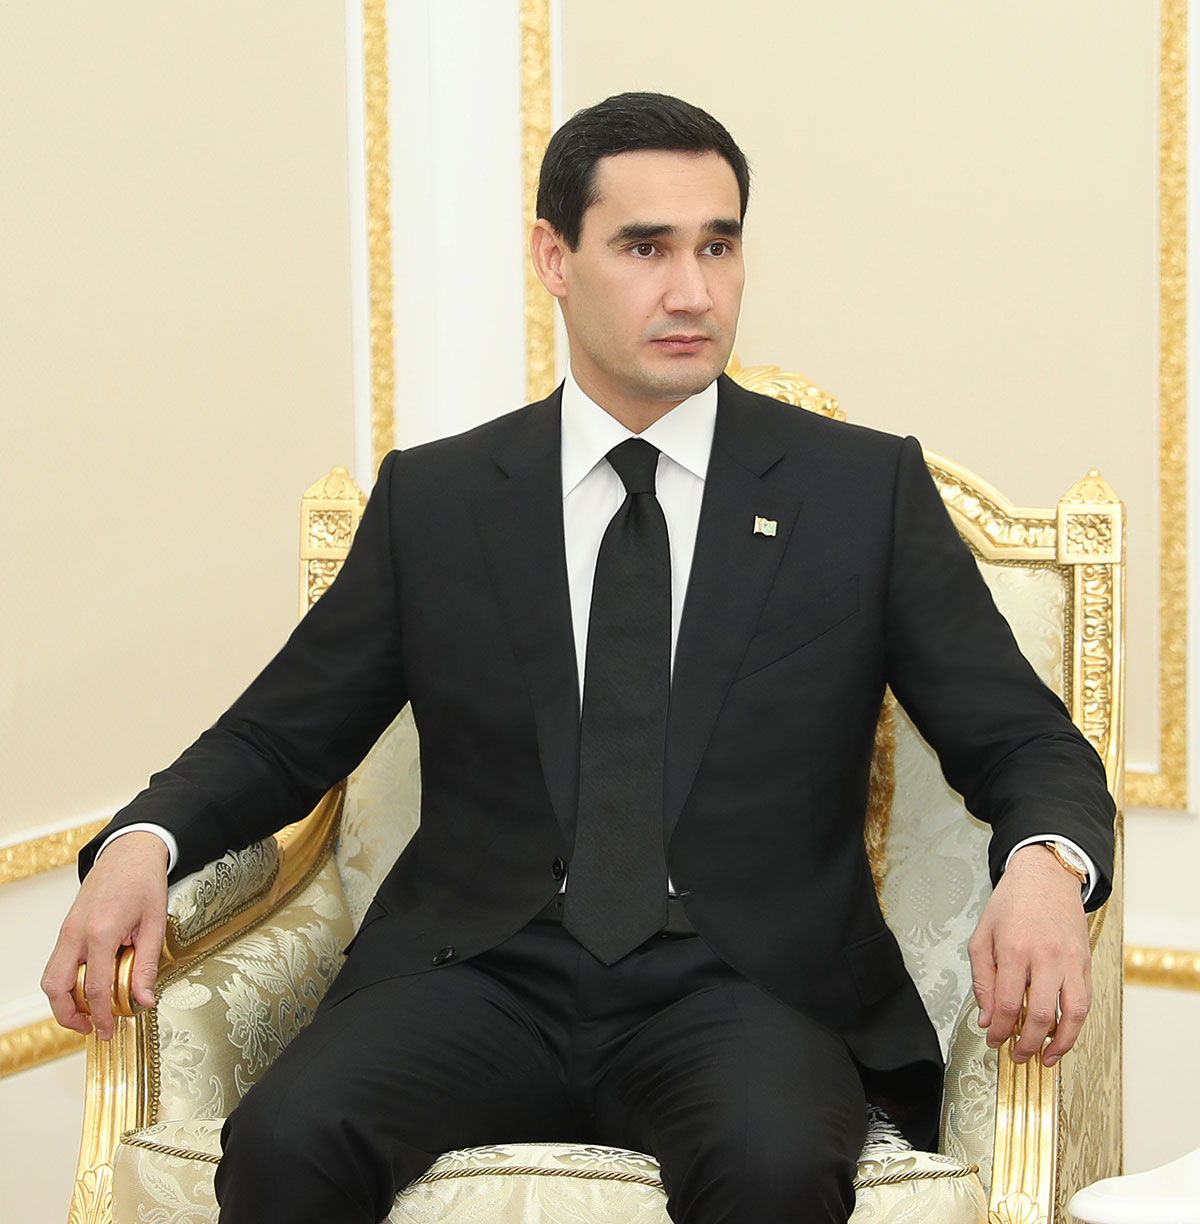 The President of Turkmenistan received the head of Cifal Company